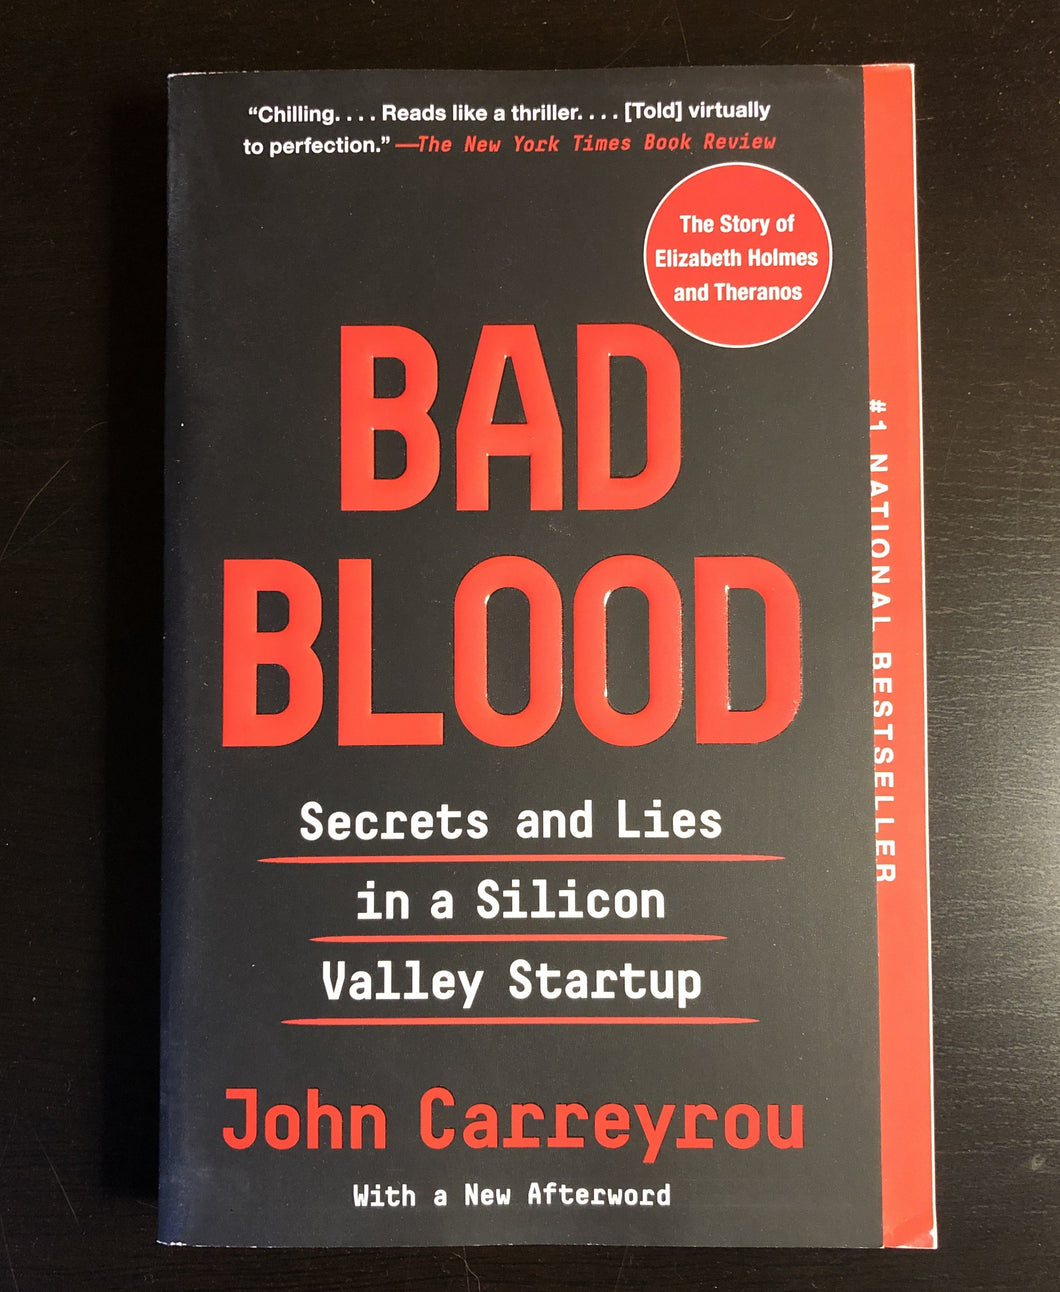 Bad Blood: Secrets and Lies in a Silicon Valley Startup